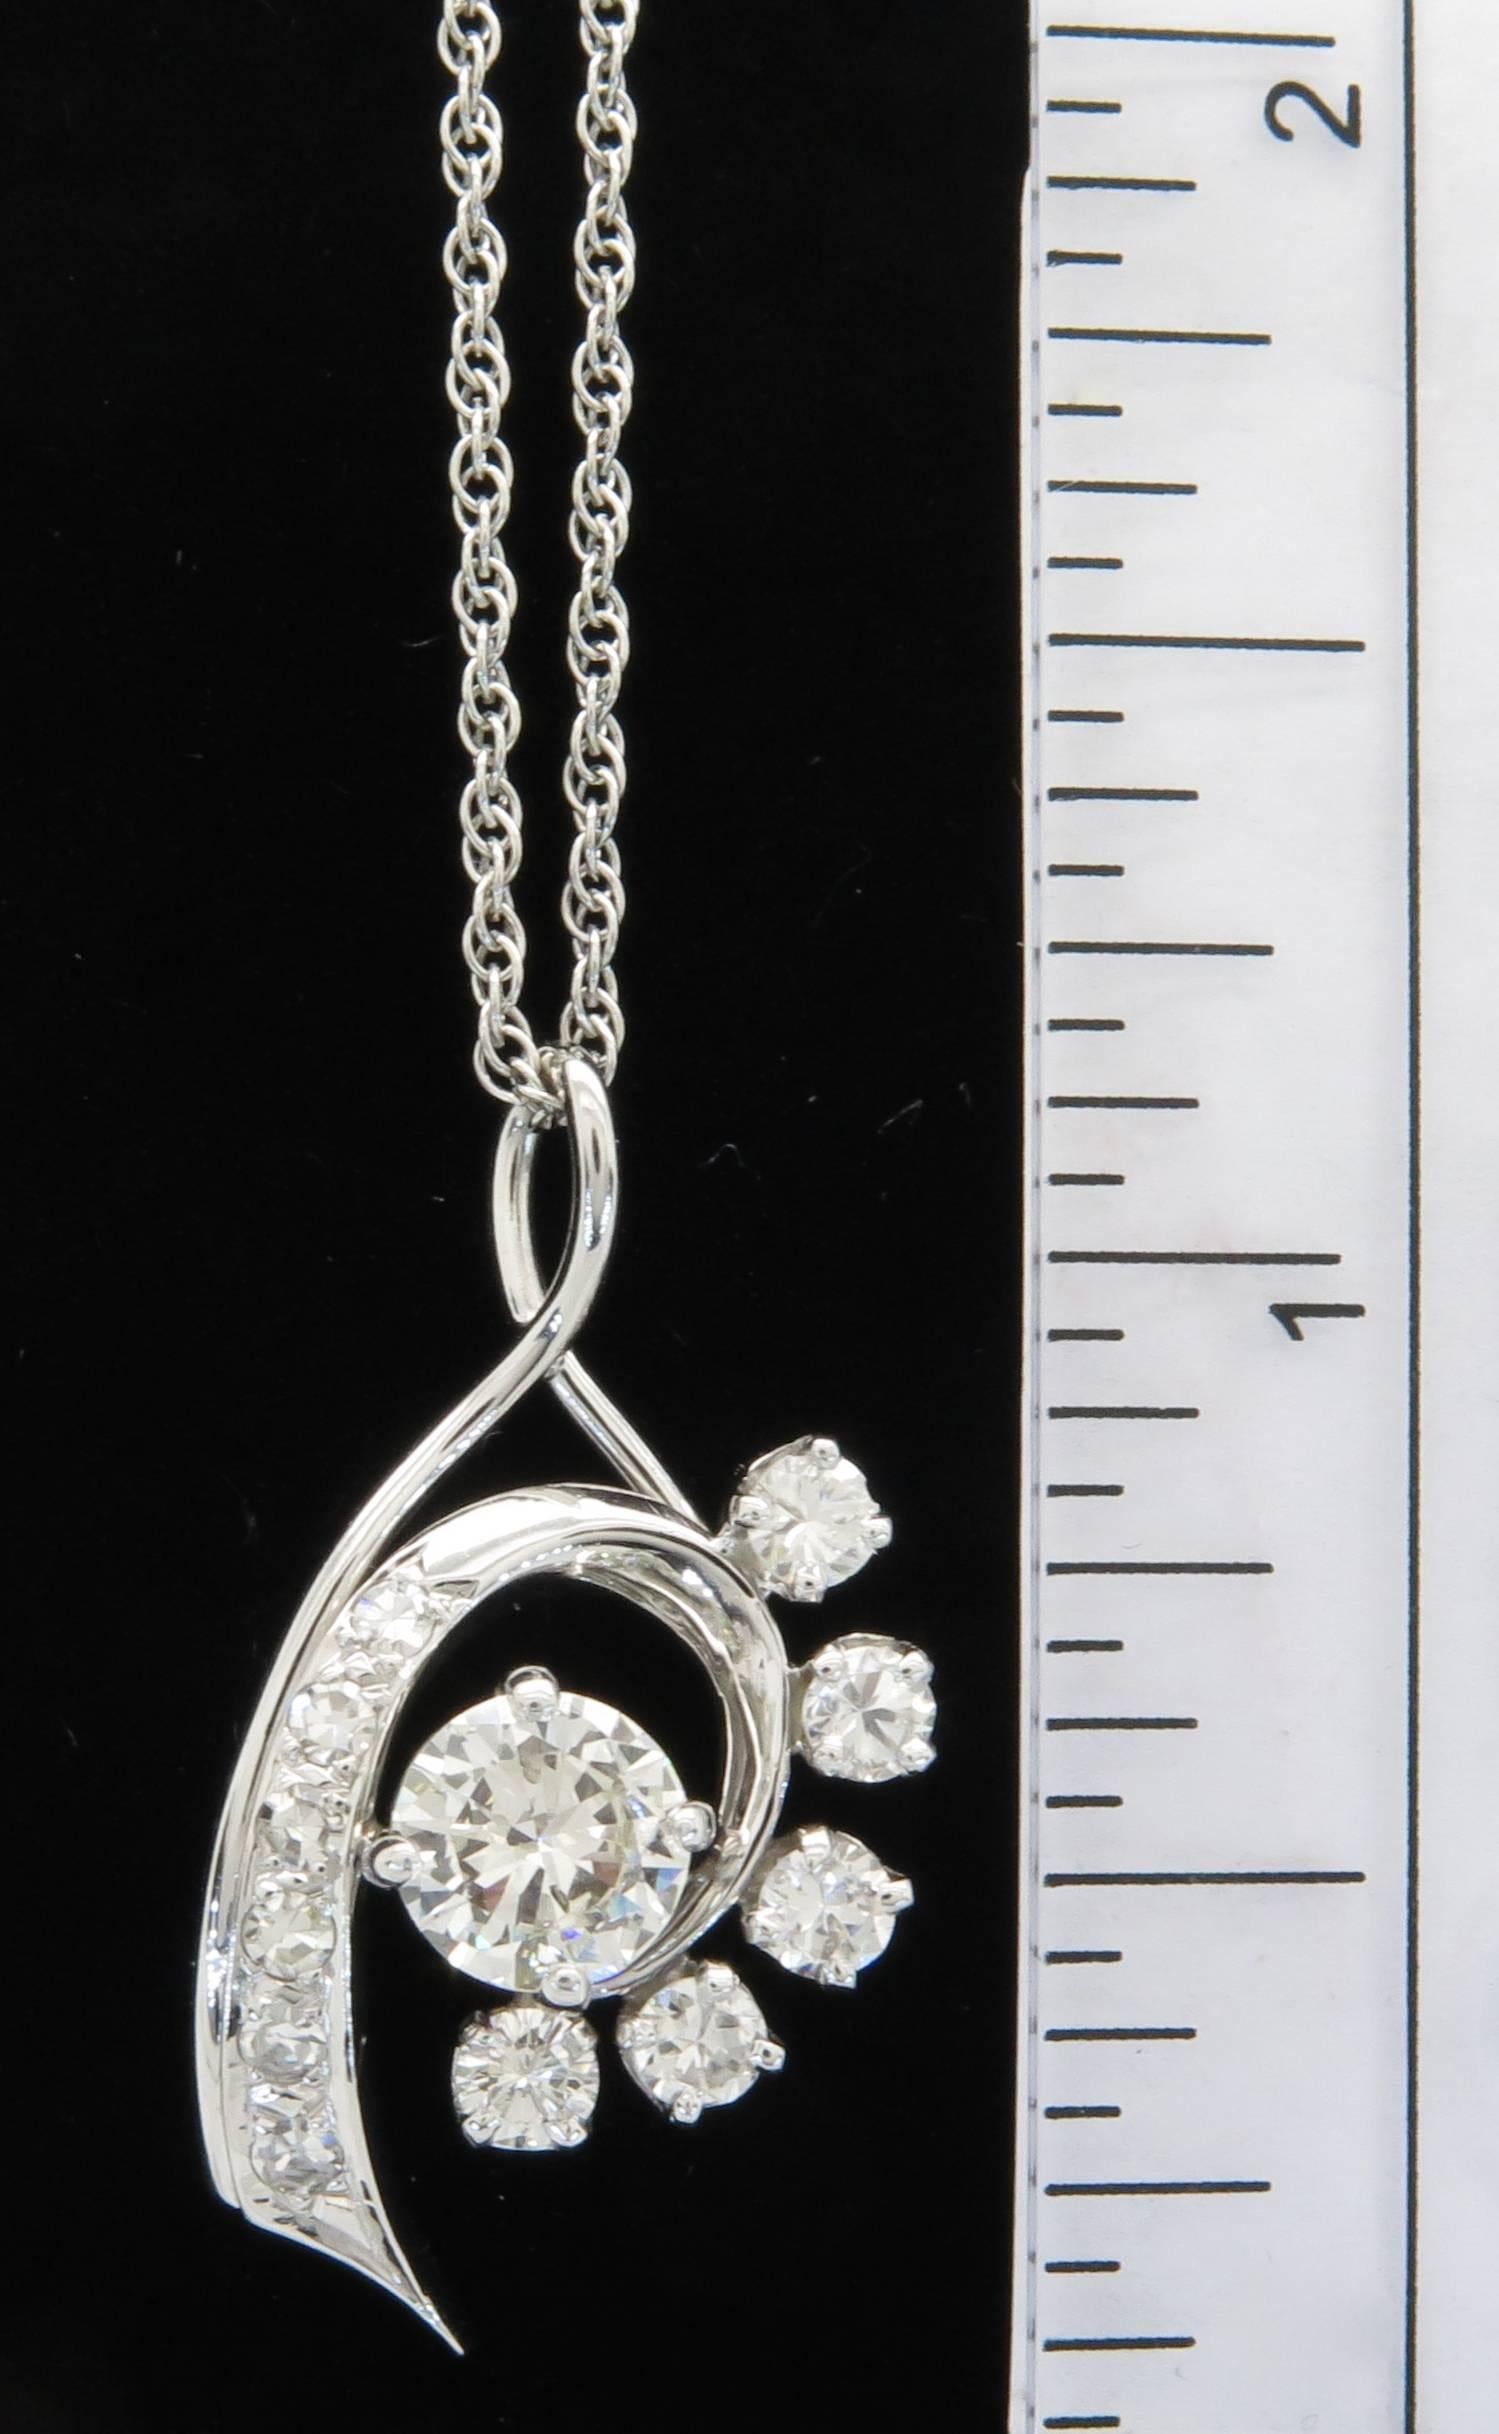 This unique pendant features 5 round brilliant cut diamonds and 6 single cut diamonds, weighing in total 0.67 carats. The diamonds are G-H in color and VS1 in clarity. The diamonds are bright white, with no eye visible inclusions. The diamonds are